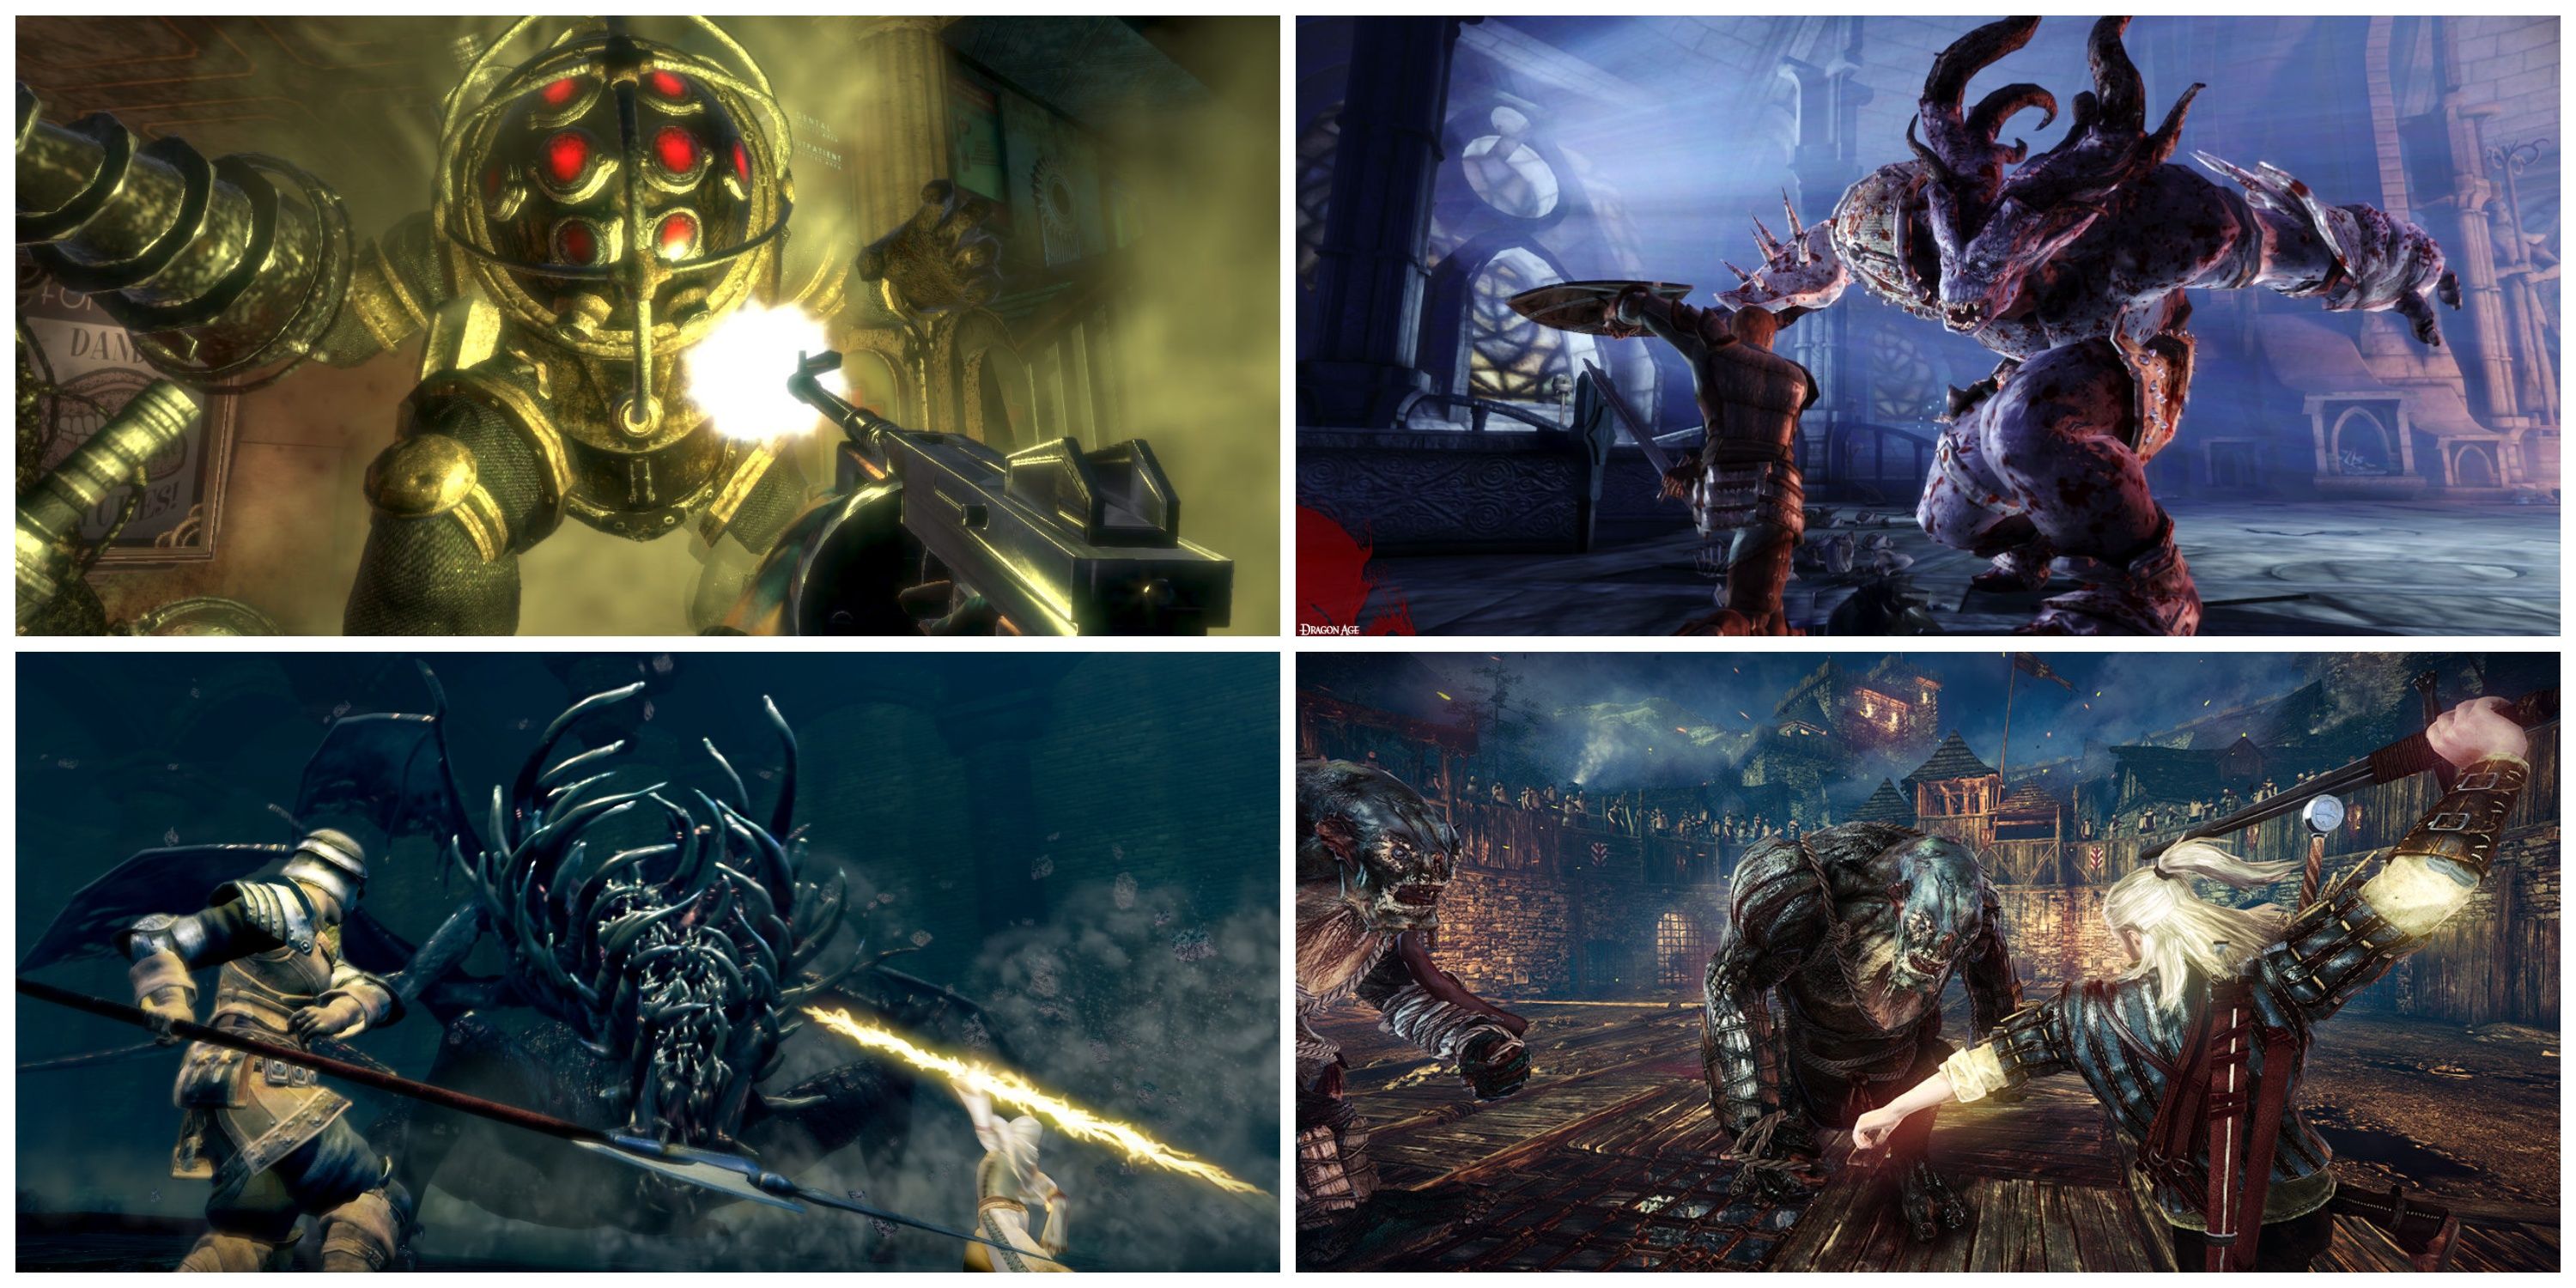 bioshock big daddy, dark sould protagonist boss fight, the witcher 2 monster fight, dragon age battle